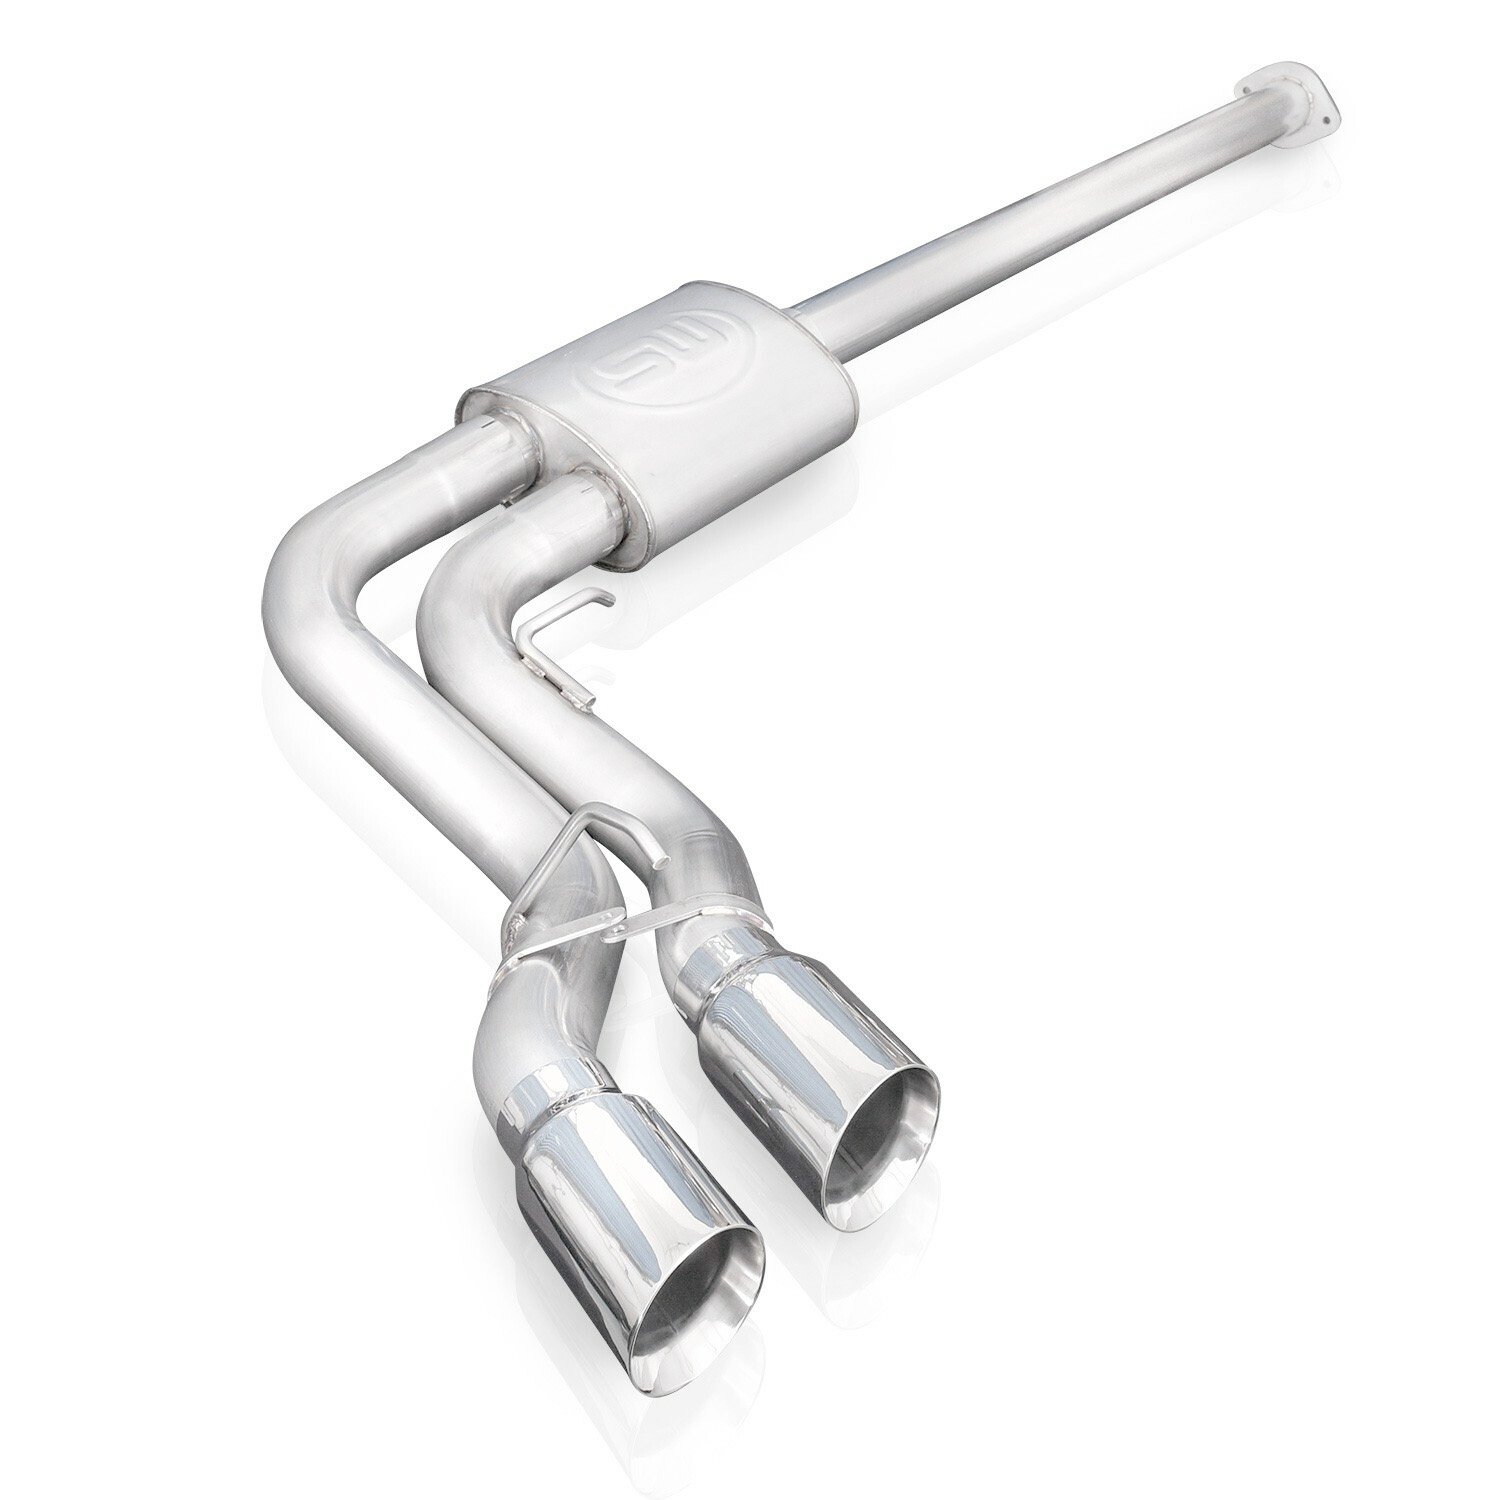 Cat-Back Exhaust System for Late-Model Ford F-150 5L